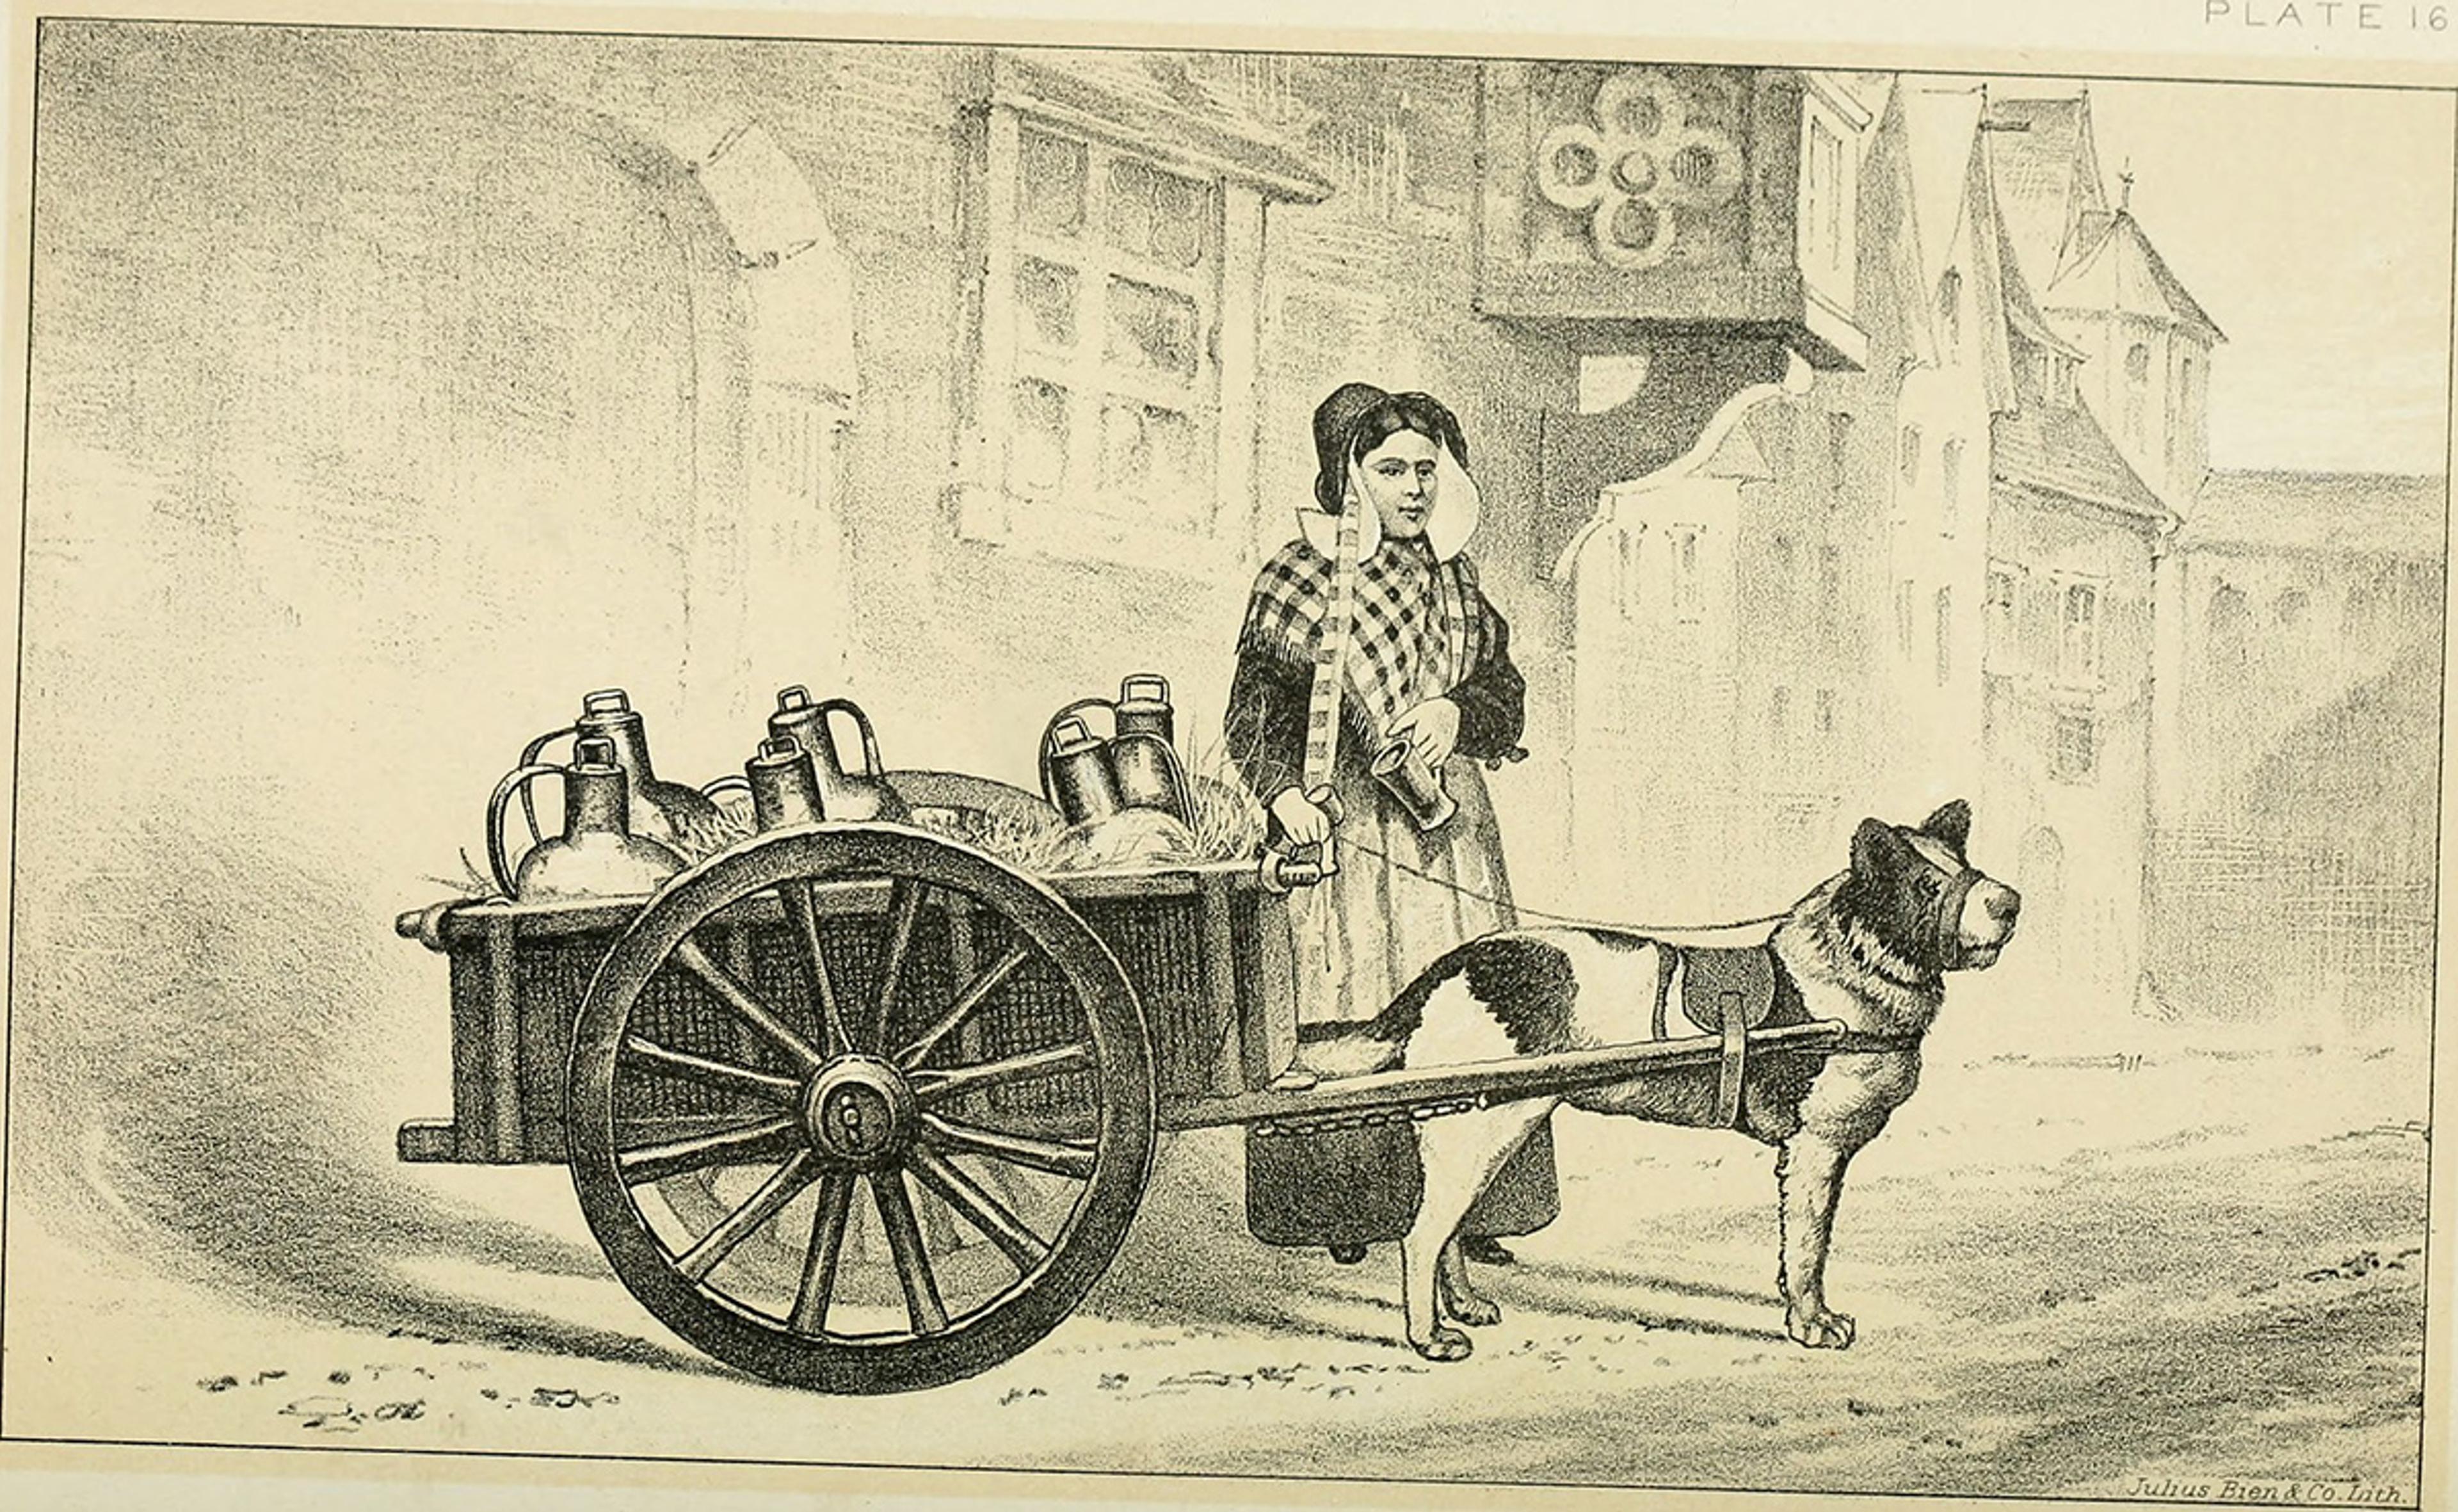 An old-fashioned scene of a woman delivering milk using a cart pulled by a dog.